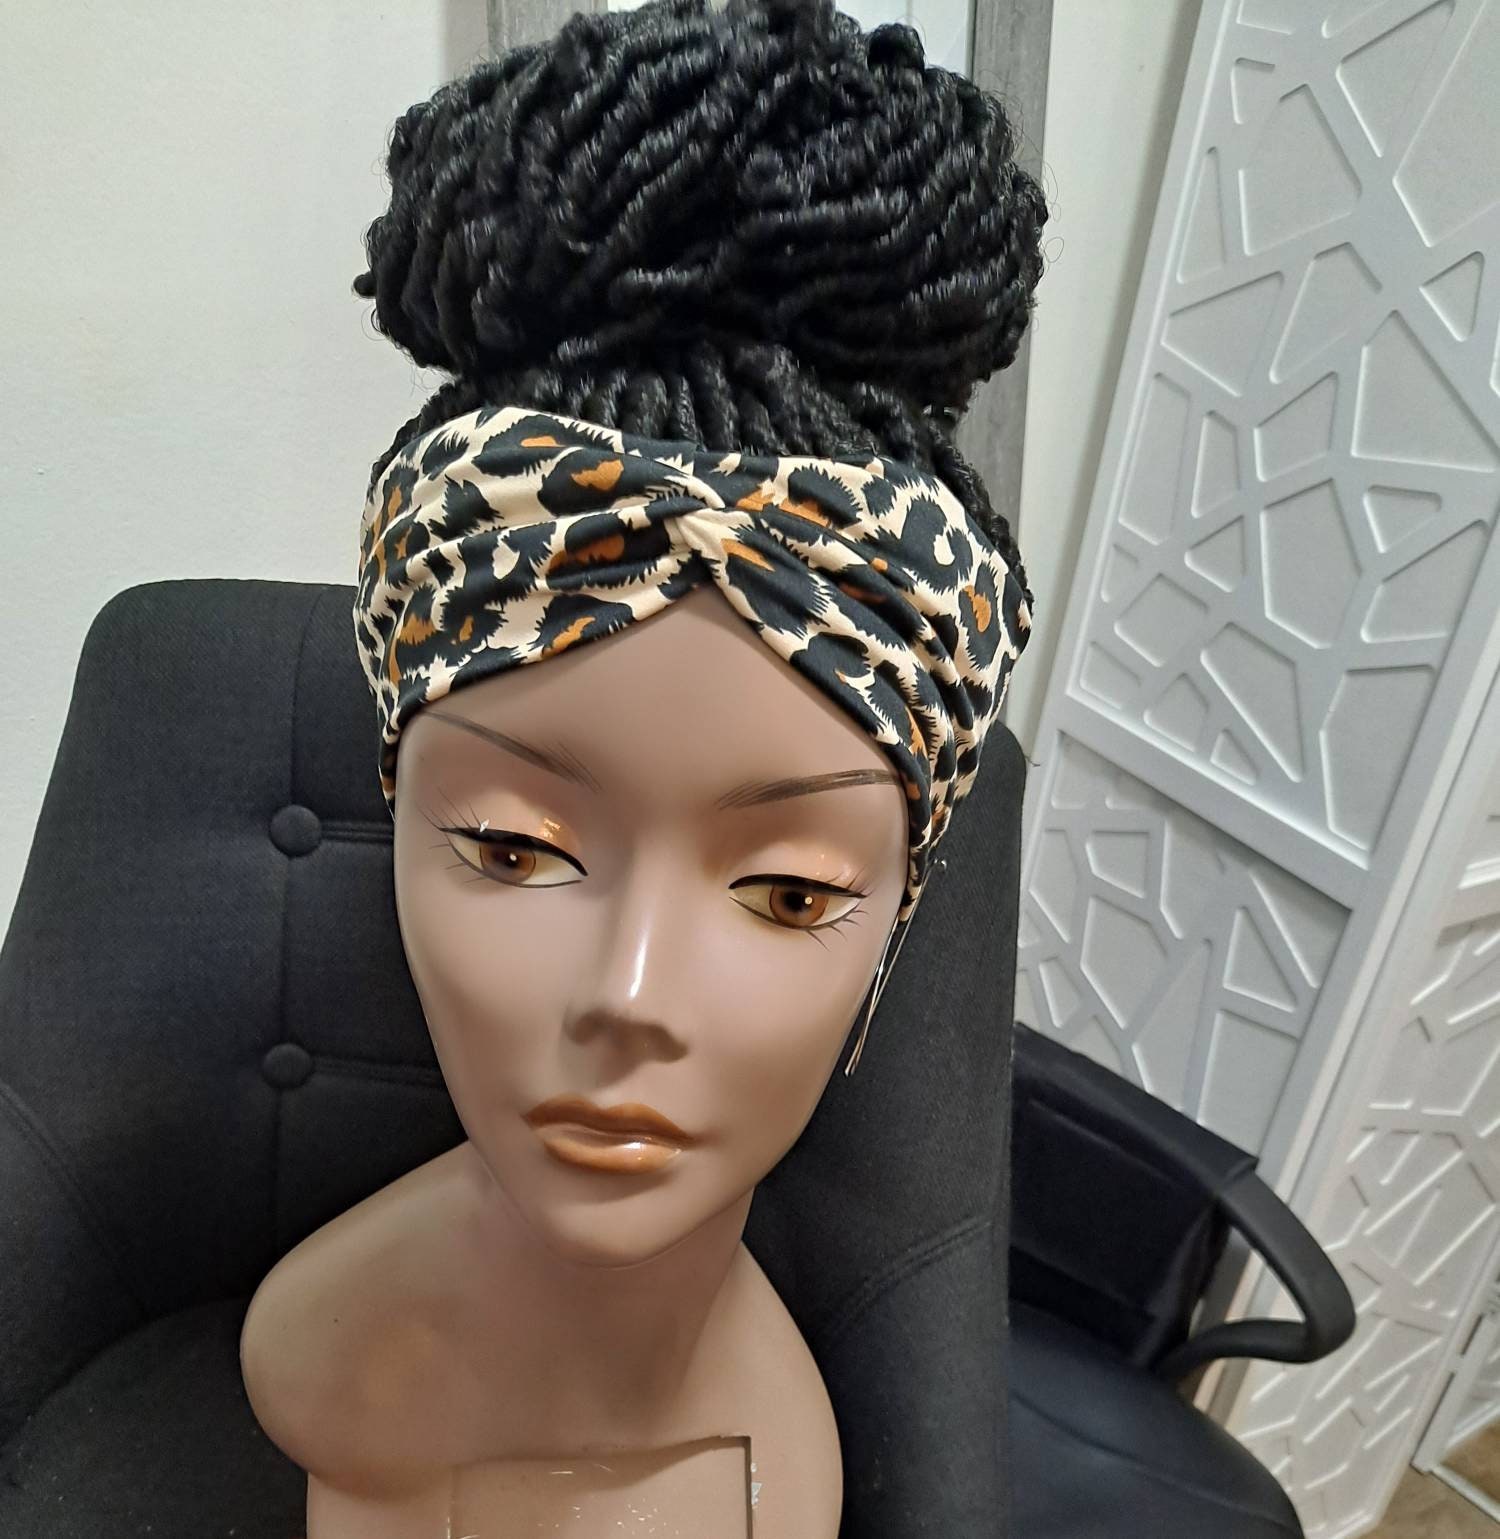 Nunify Black Skin Mannequin Head With Shoulders For Wigs Display Wig Making  Tools Makeup Mannequin Head For Hats And Scarves